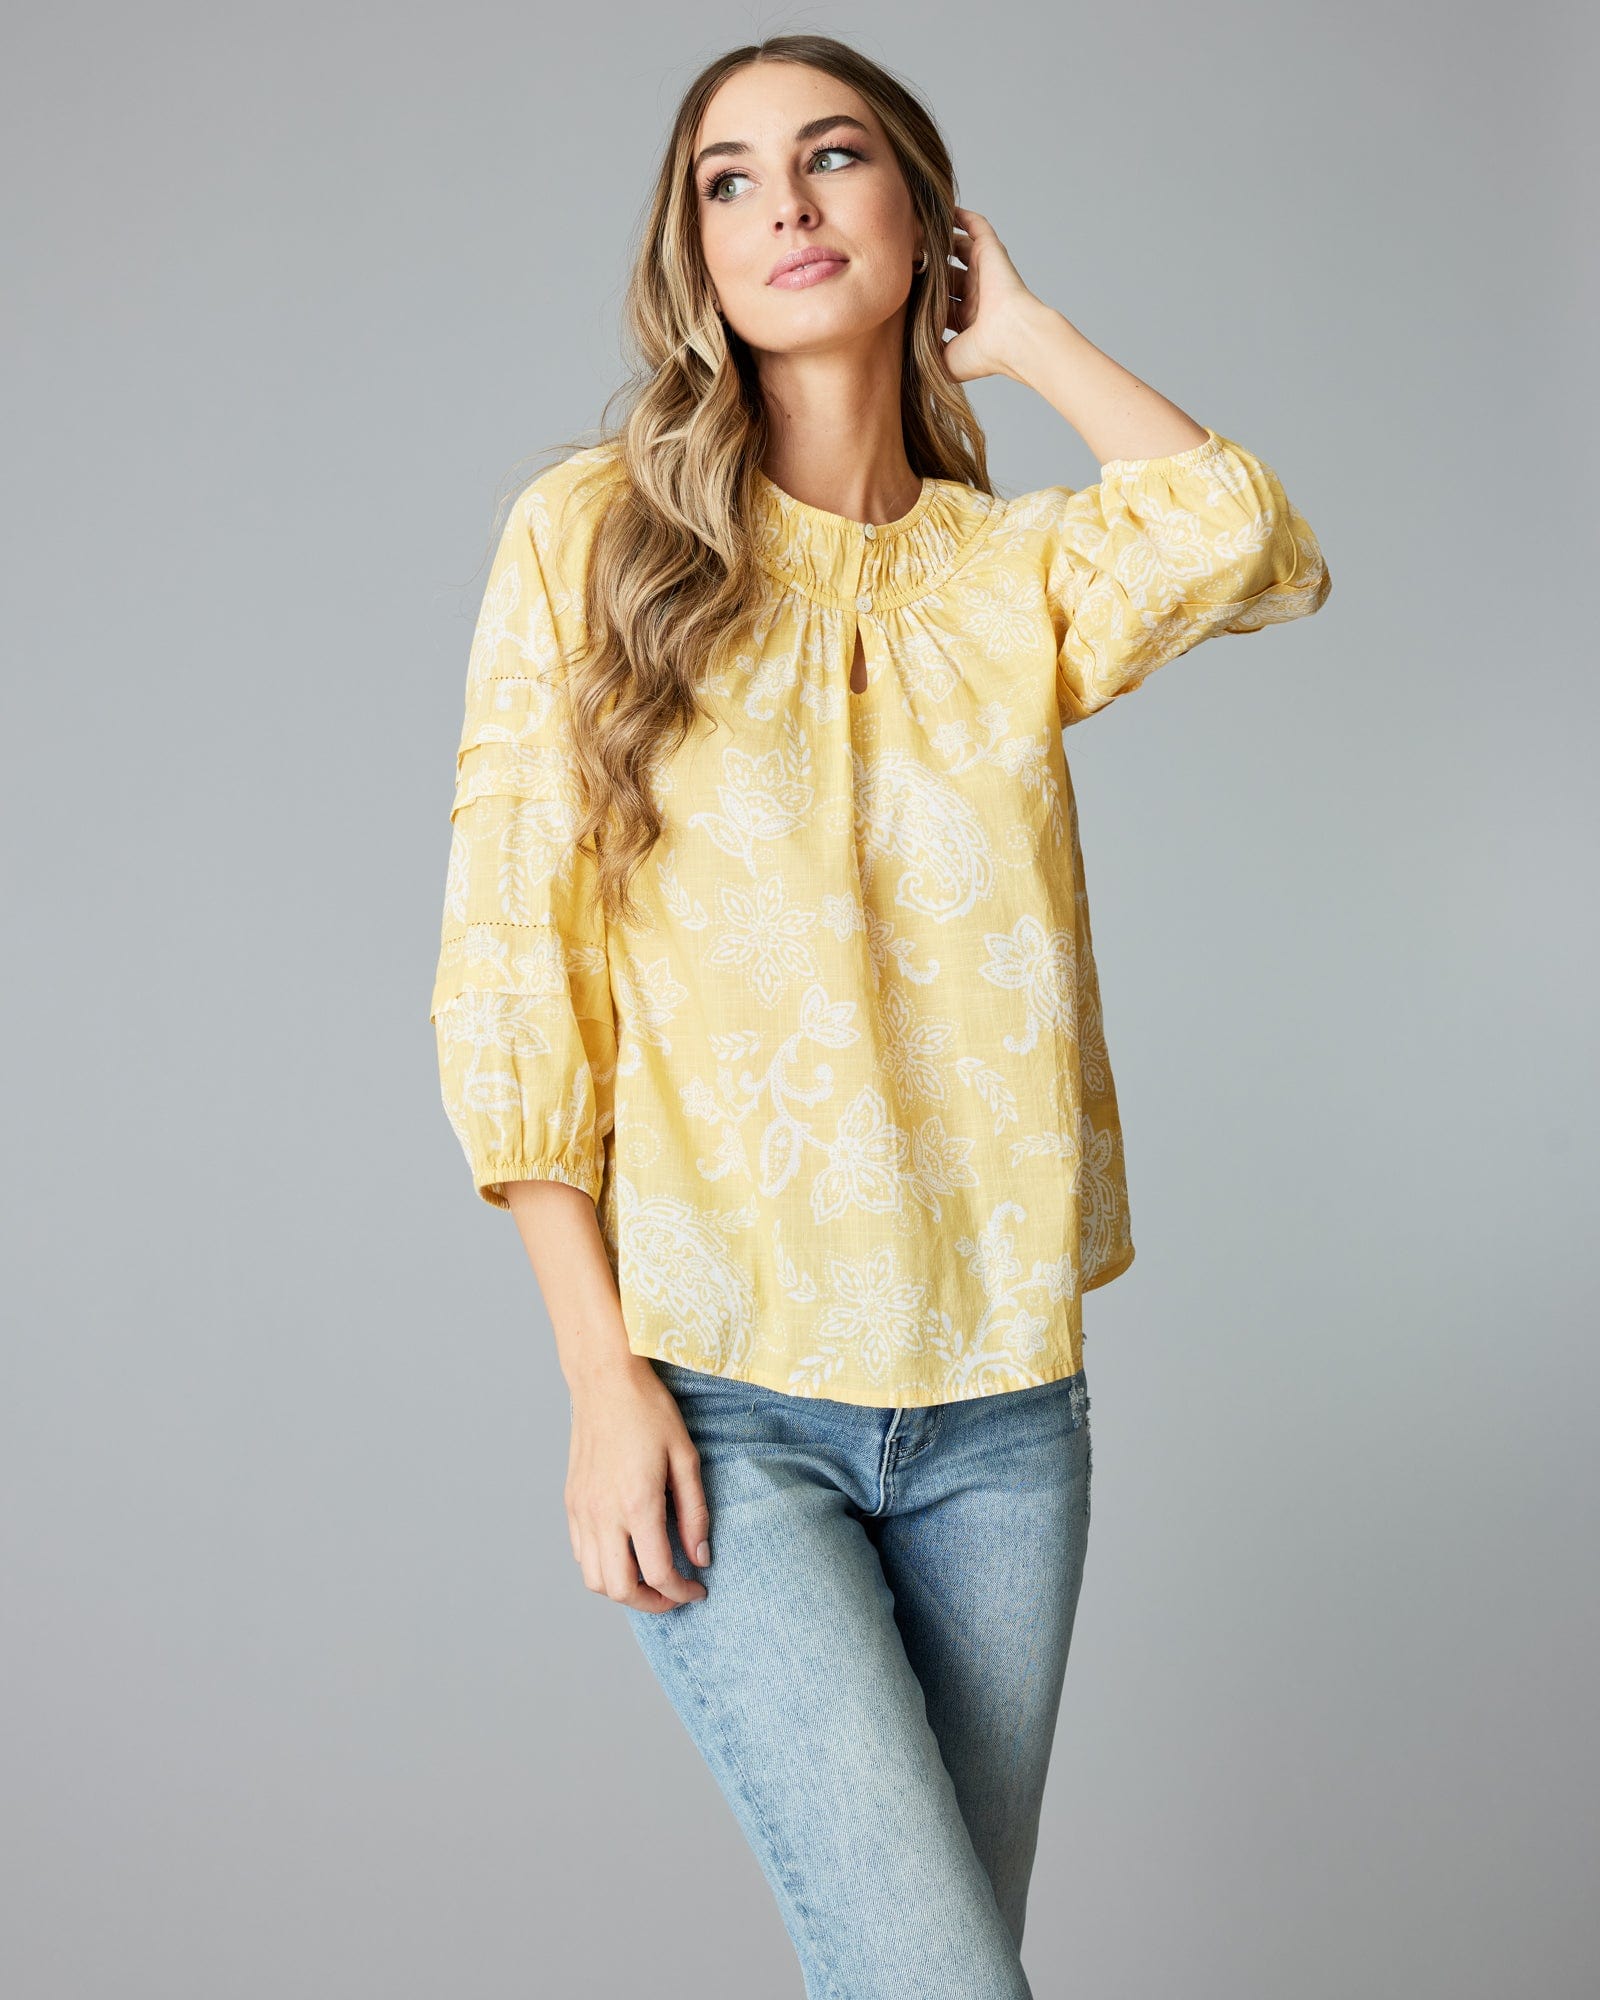 Woman in a 3/4 sleeve, yellow blouse.